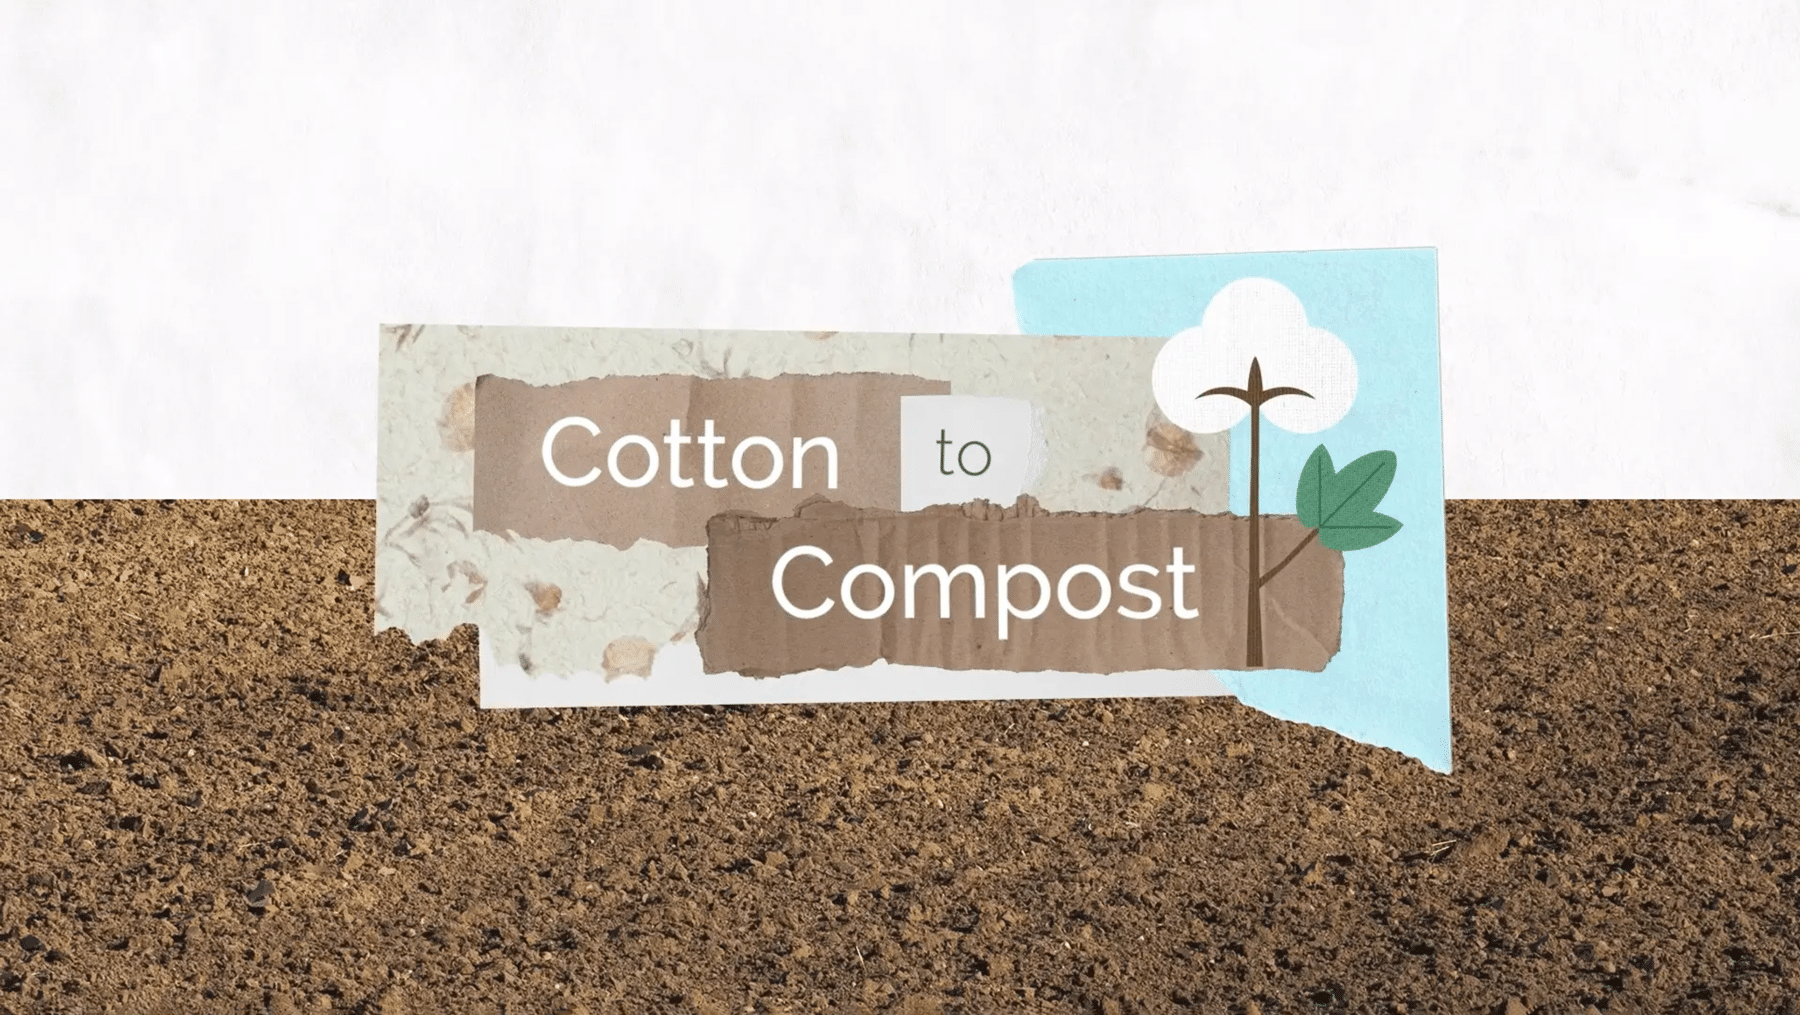 Cotton to Compost